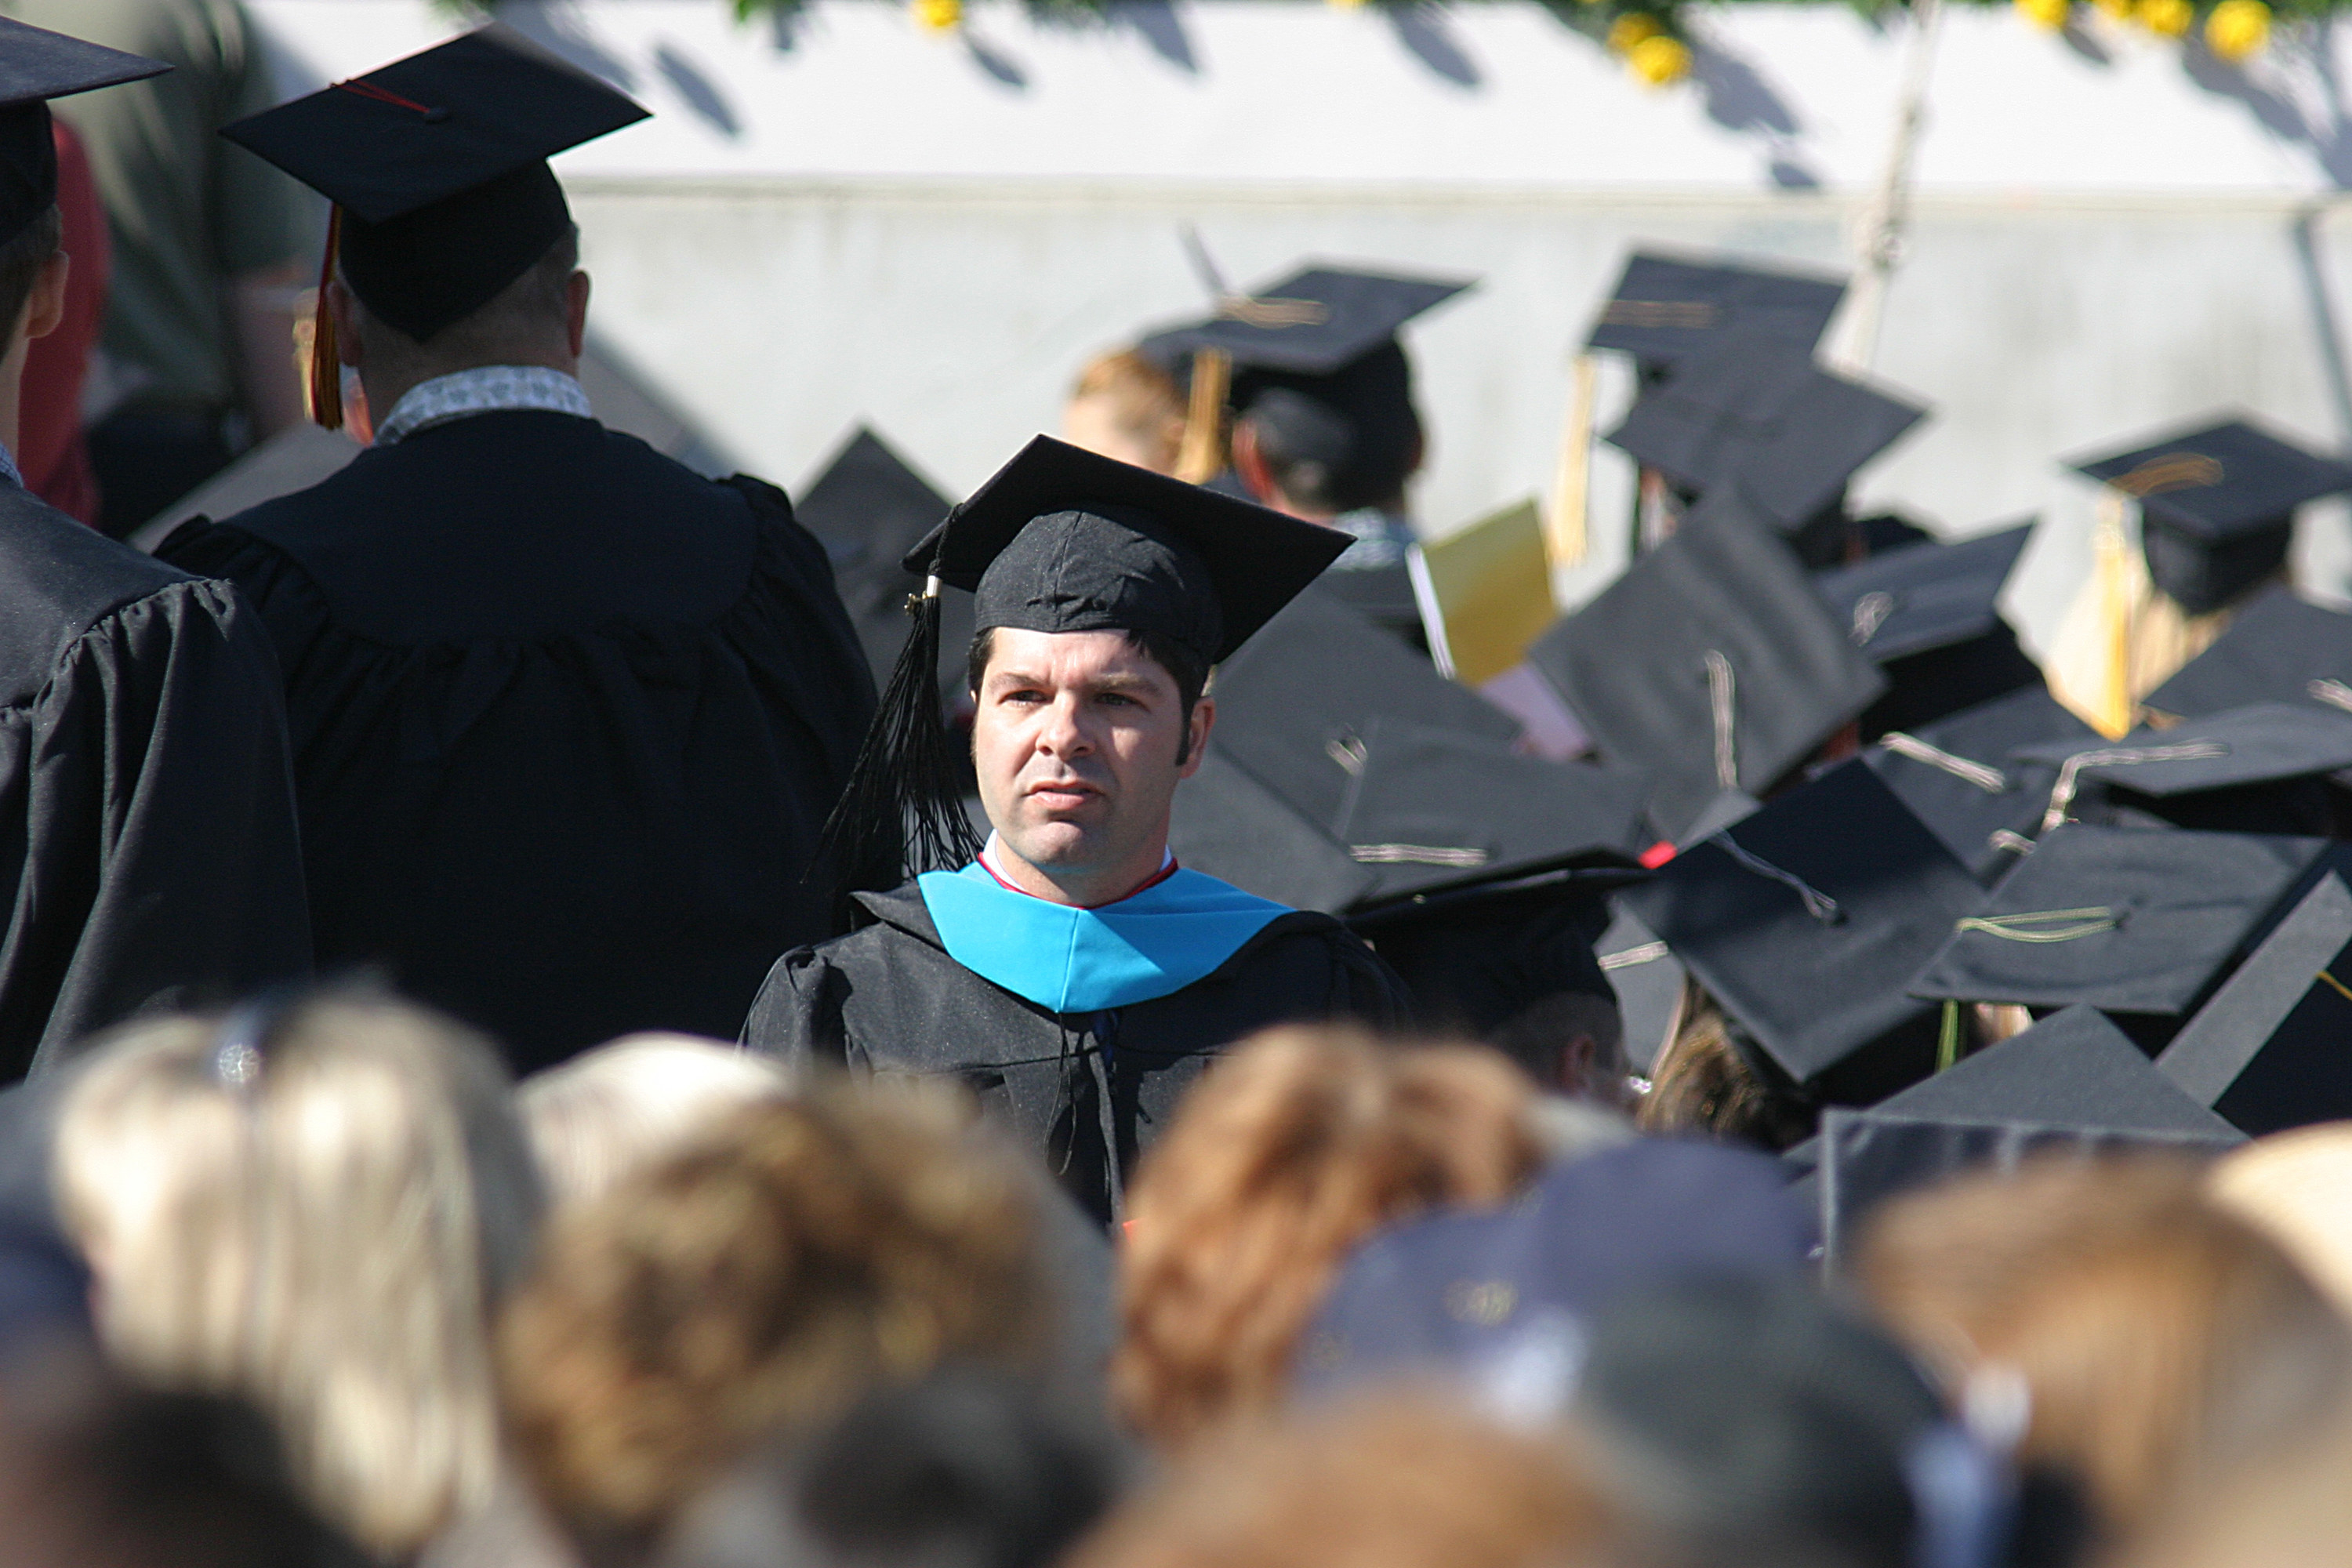 A college graduate stands during commencement